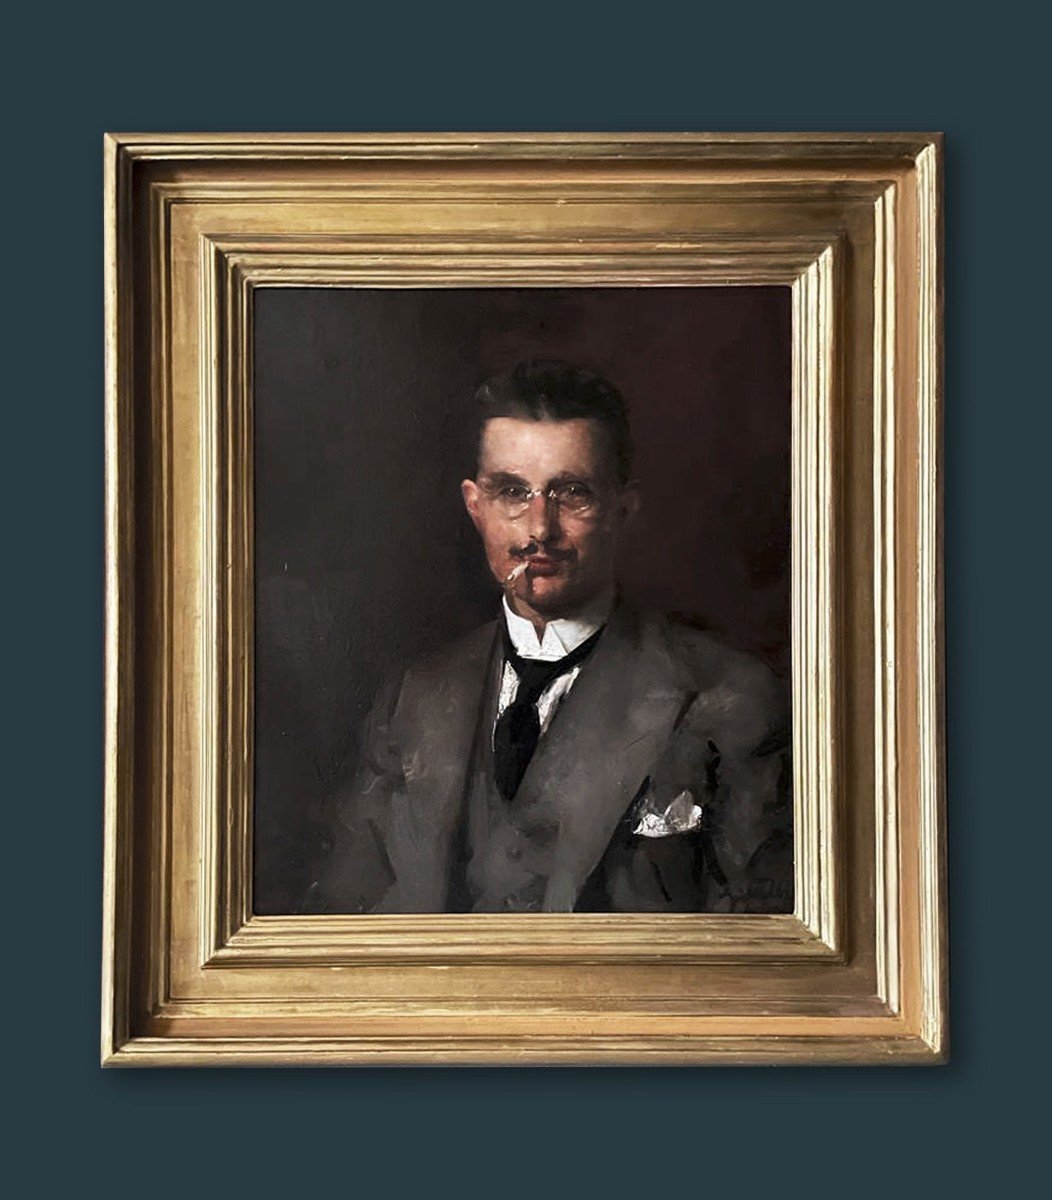 Portrait Of An Elegant Man With A Cigarette - Guido Tallone (1894-1967)